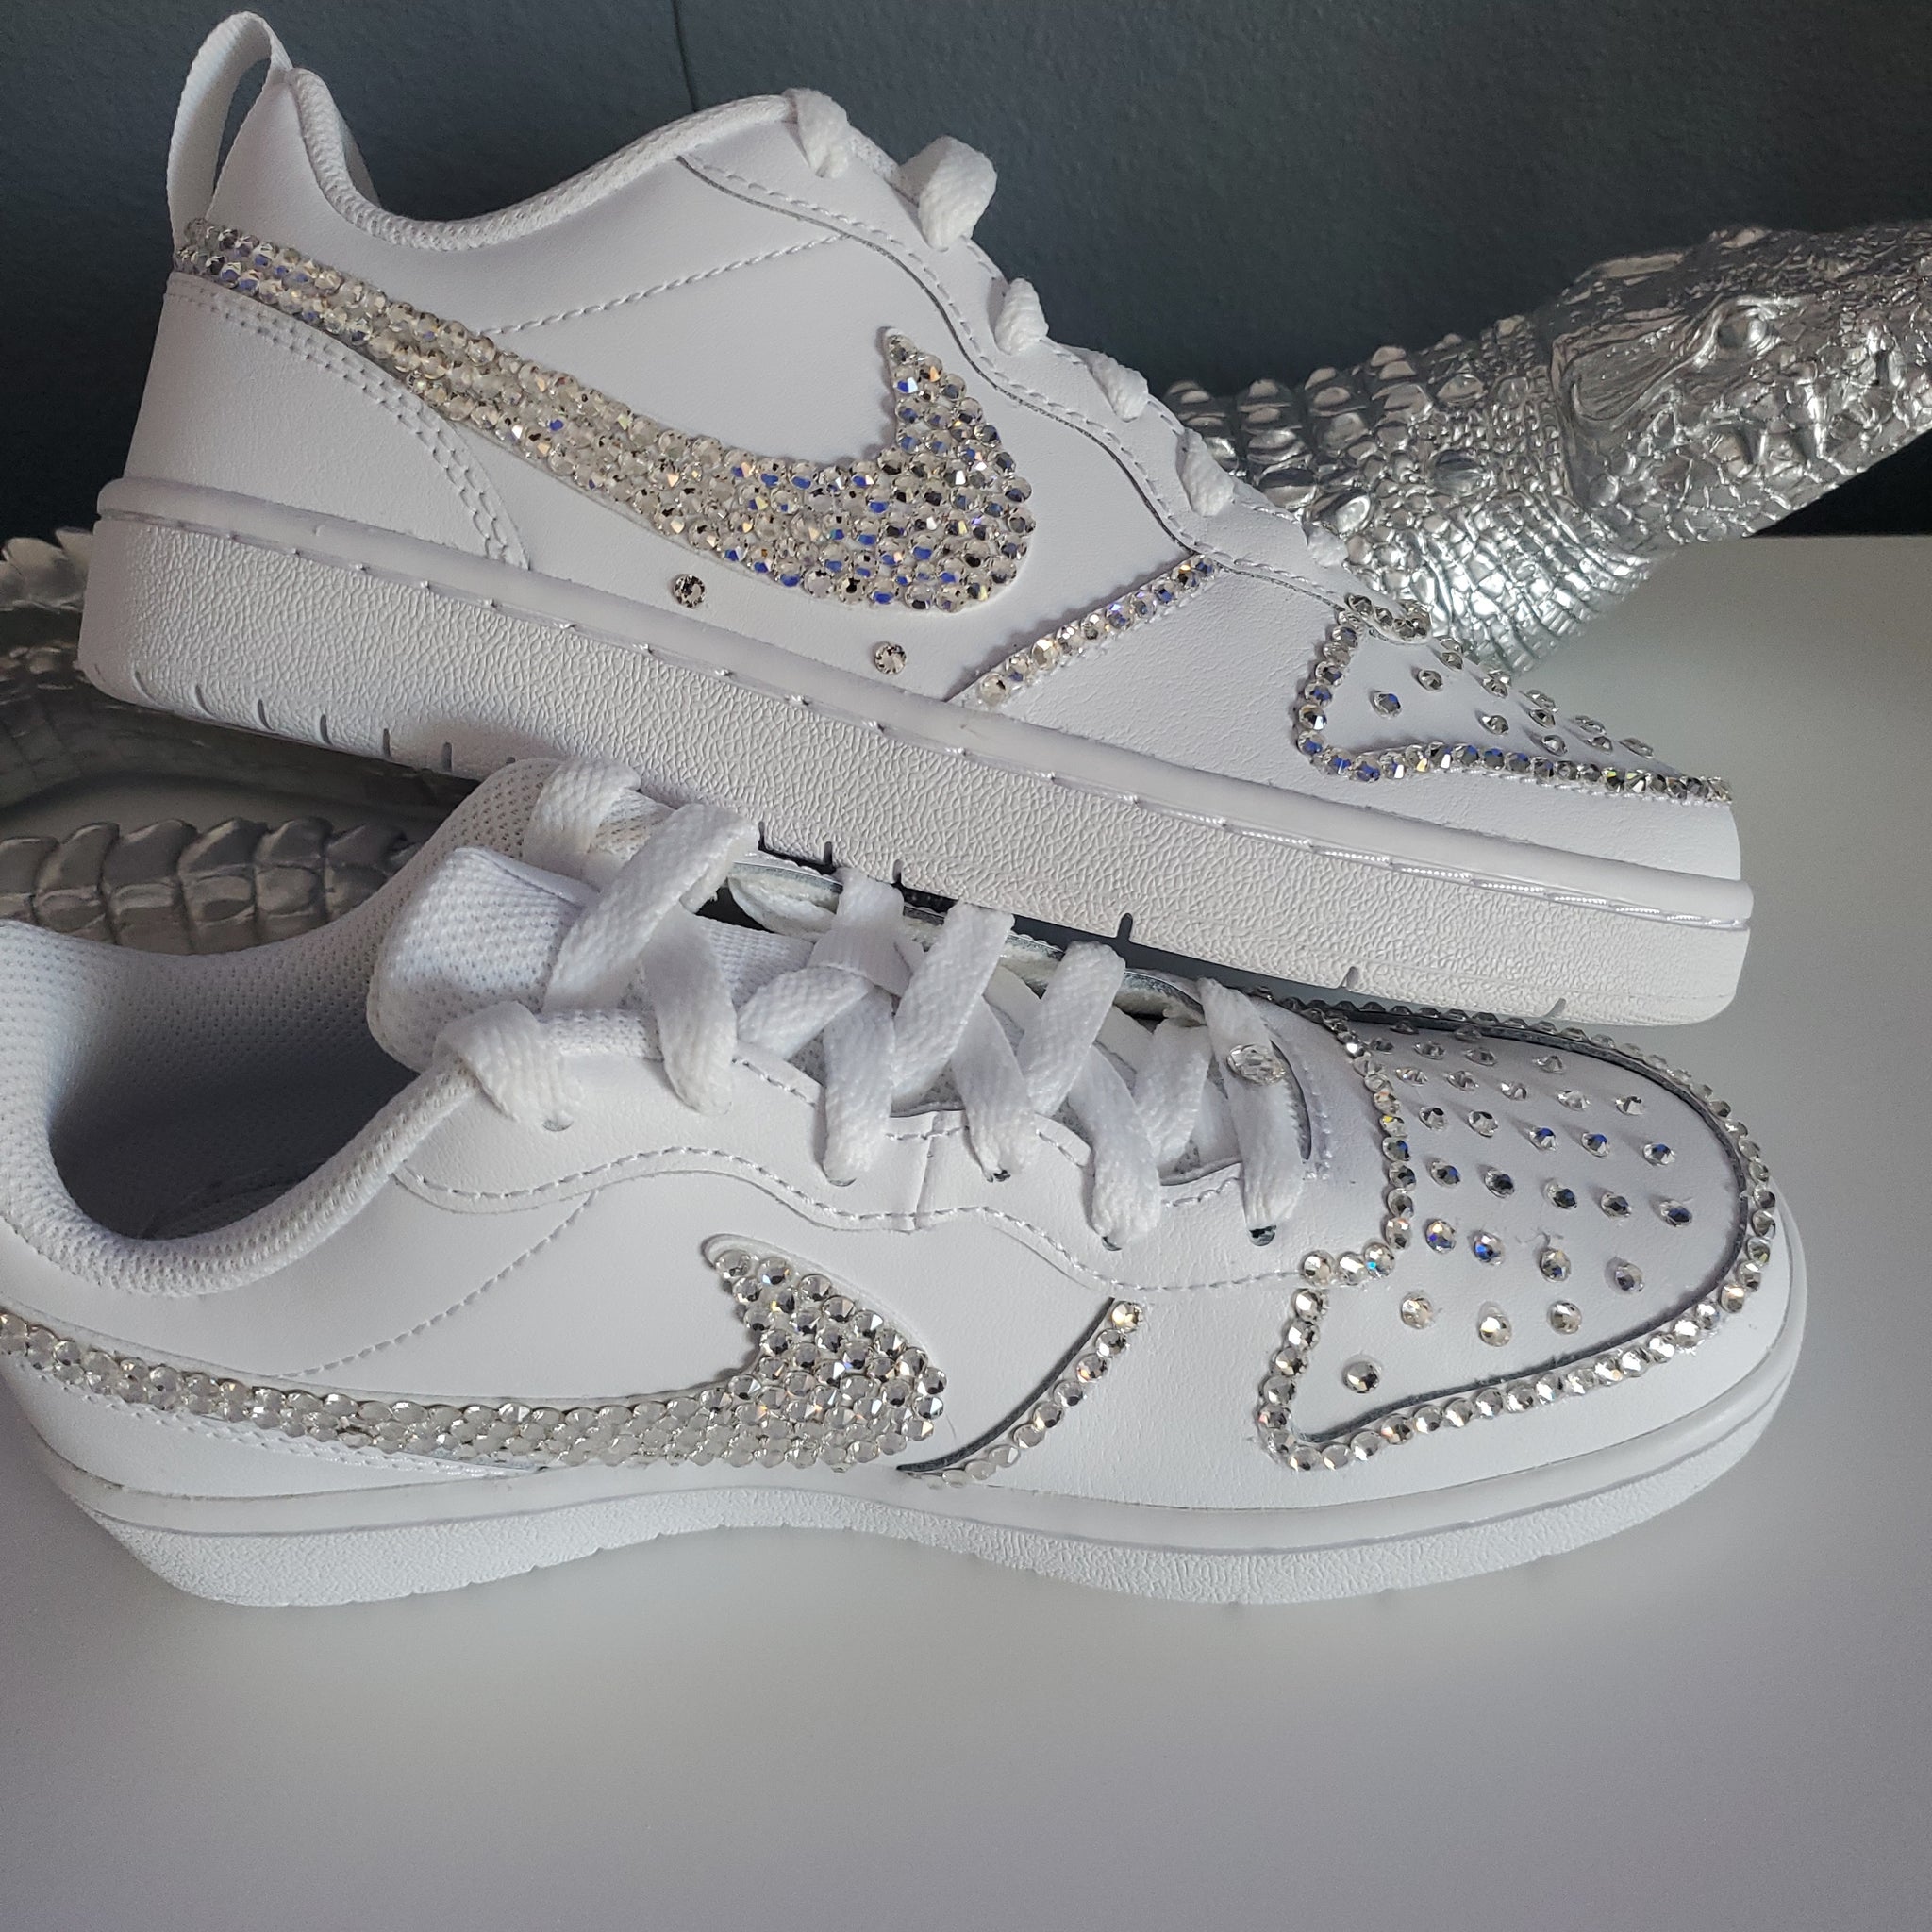 Big Air Force Sneakers with Crystals